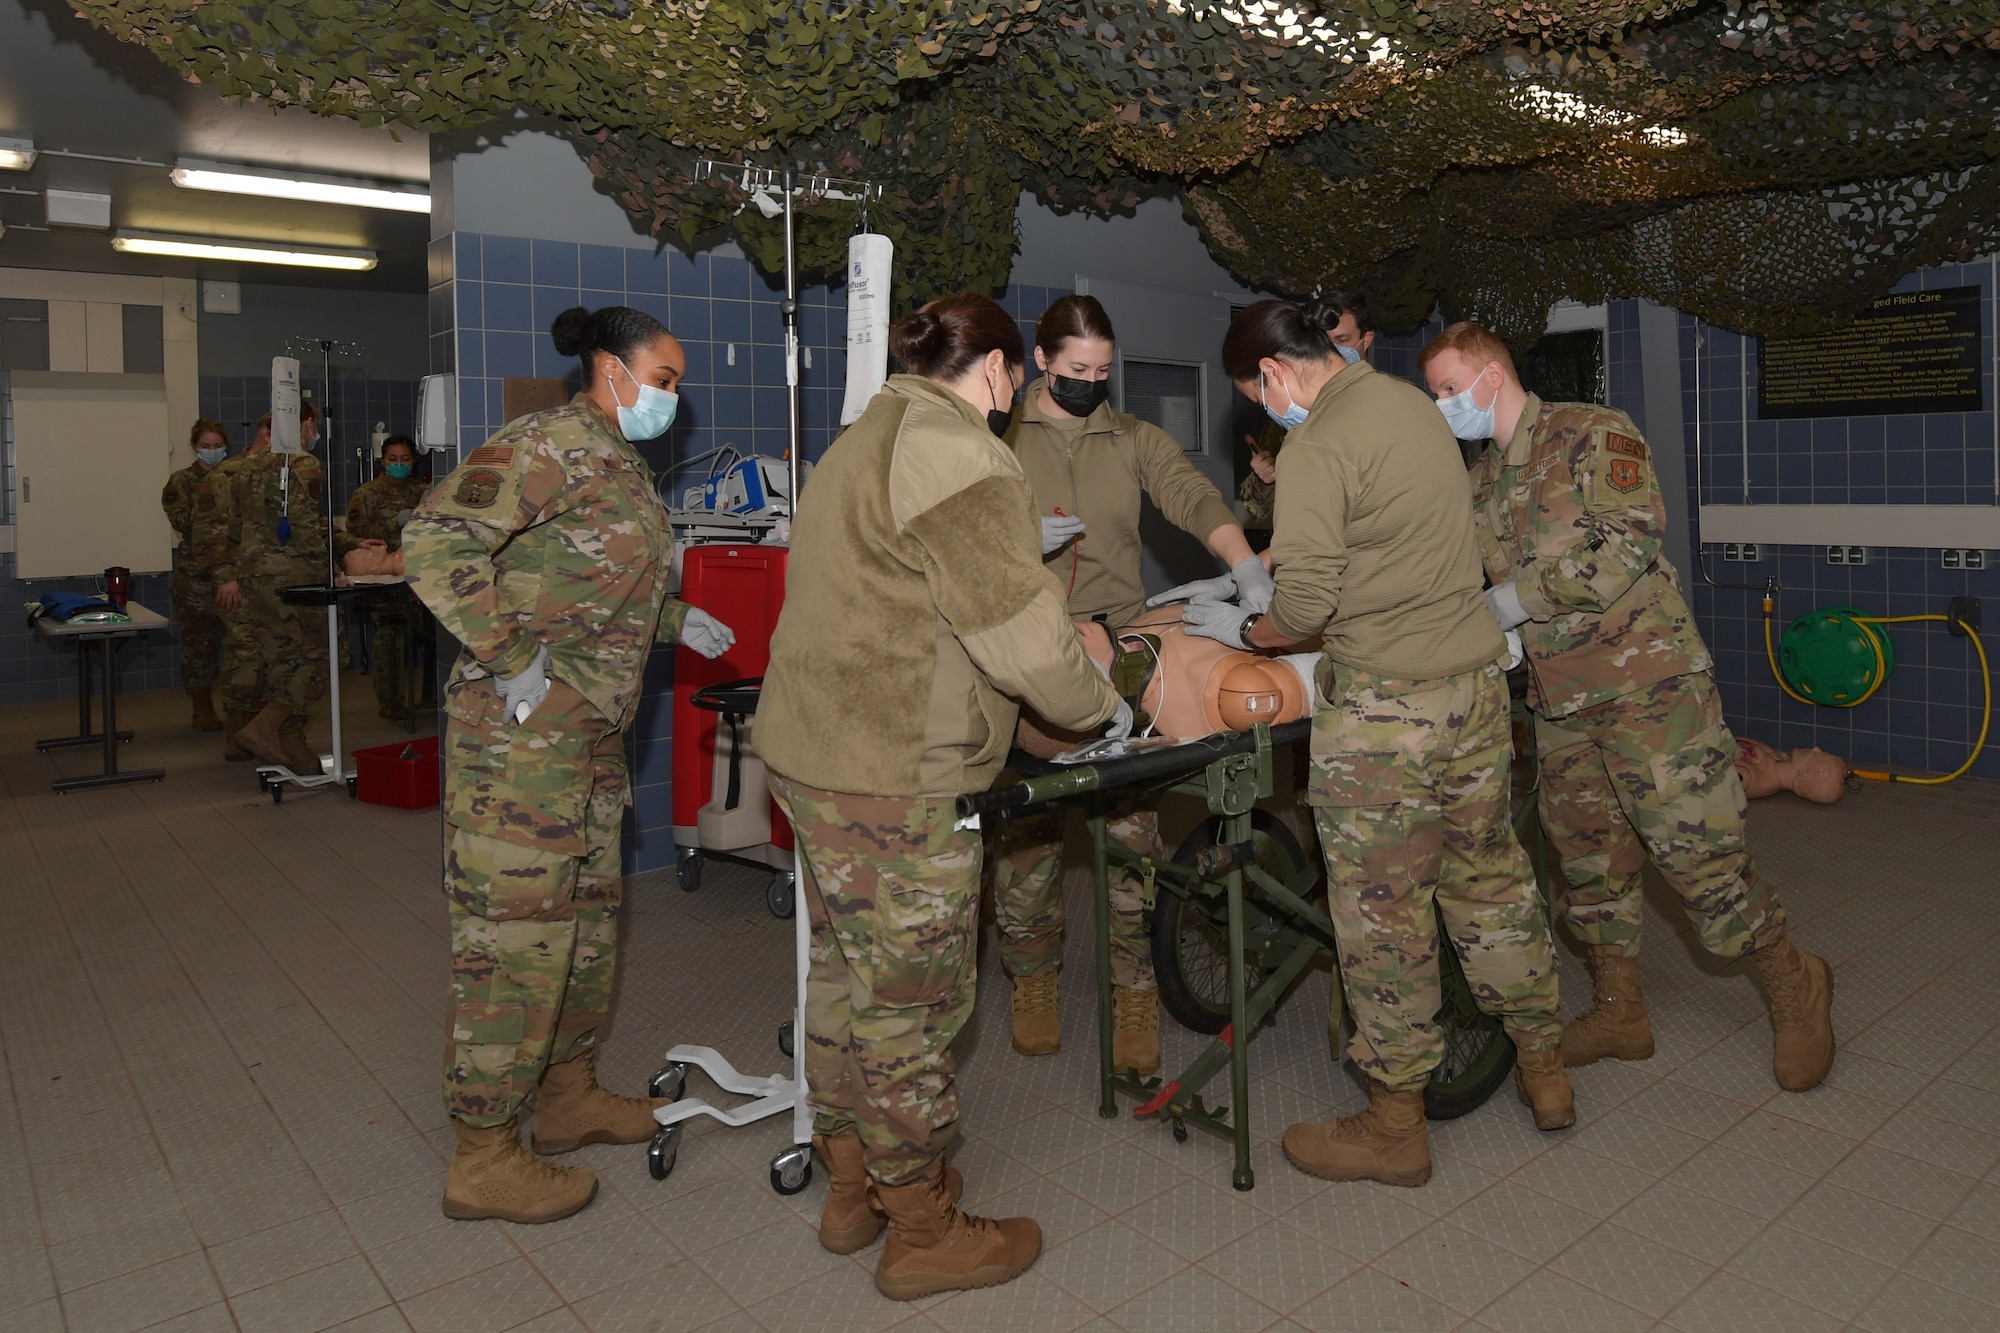 Airmen standing around a simulated medical patient mannequin.